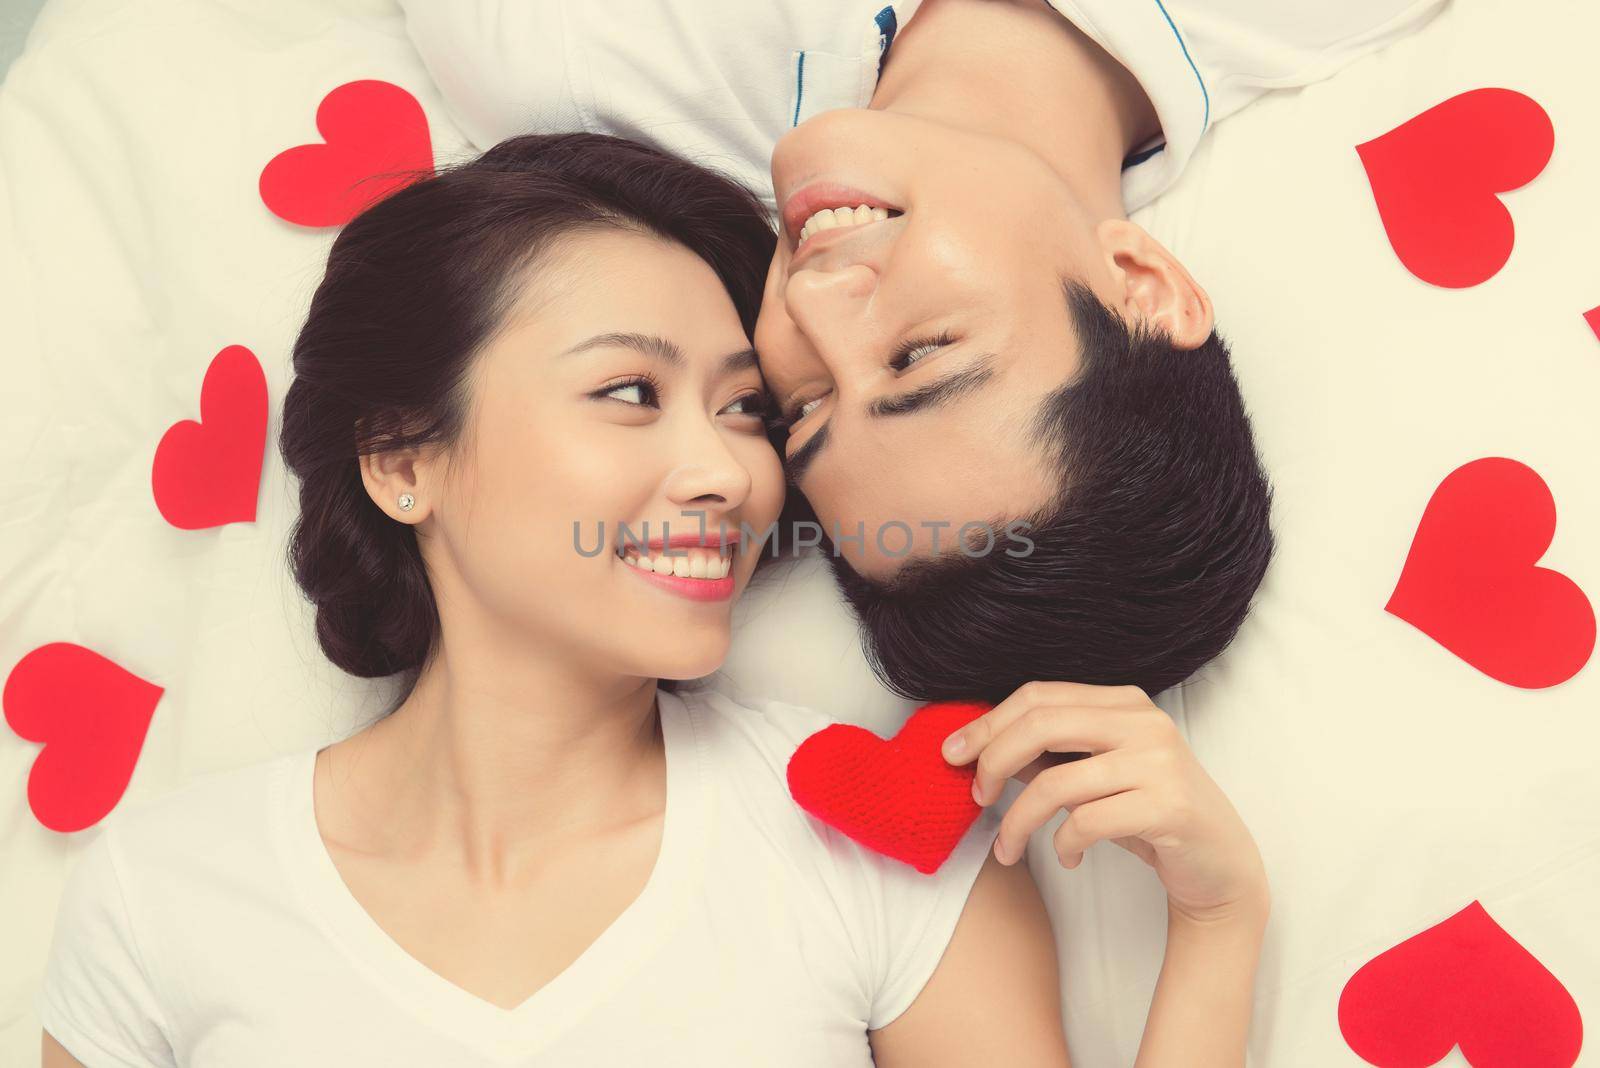 Couple of asian lovers at the beginning of love story having fun together.